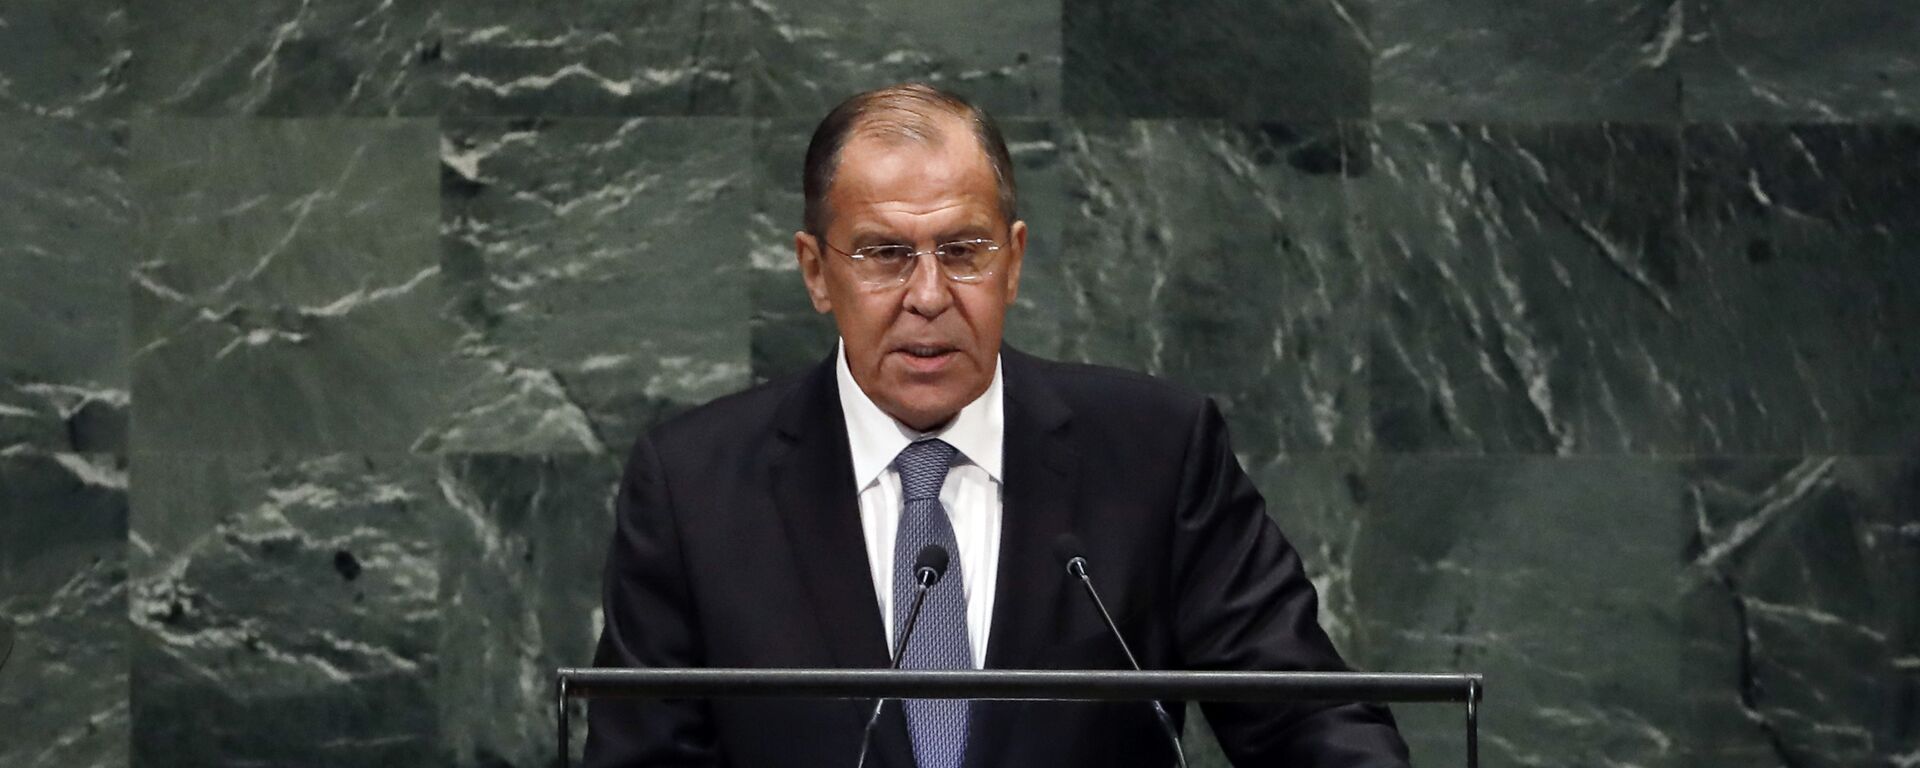 Russia's Foreign Minister Sergey Lavrov addresses the 73rd session of the United Nations General Assembly, at U.N. headquarters, Friday, Sept. 28, 2018 - Sputnik International, 1920, 22.01.2024